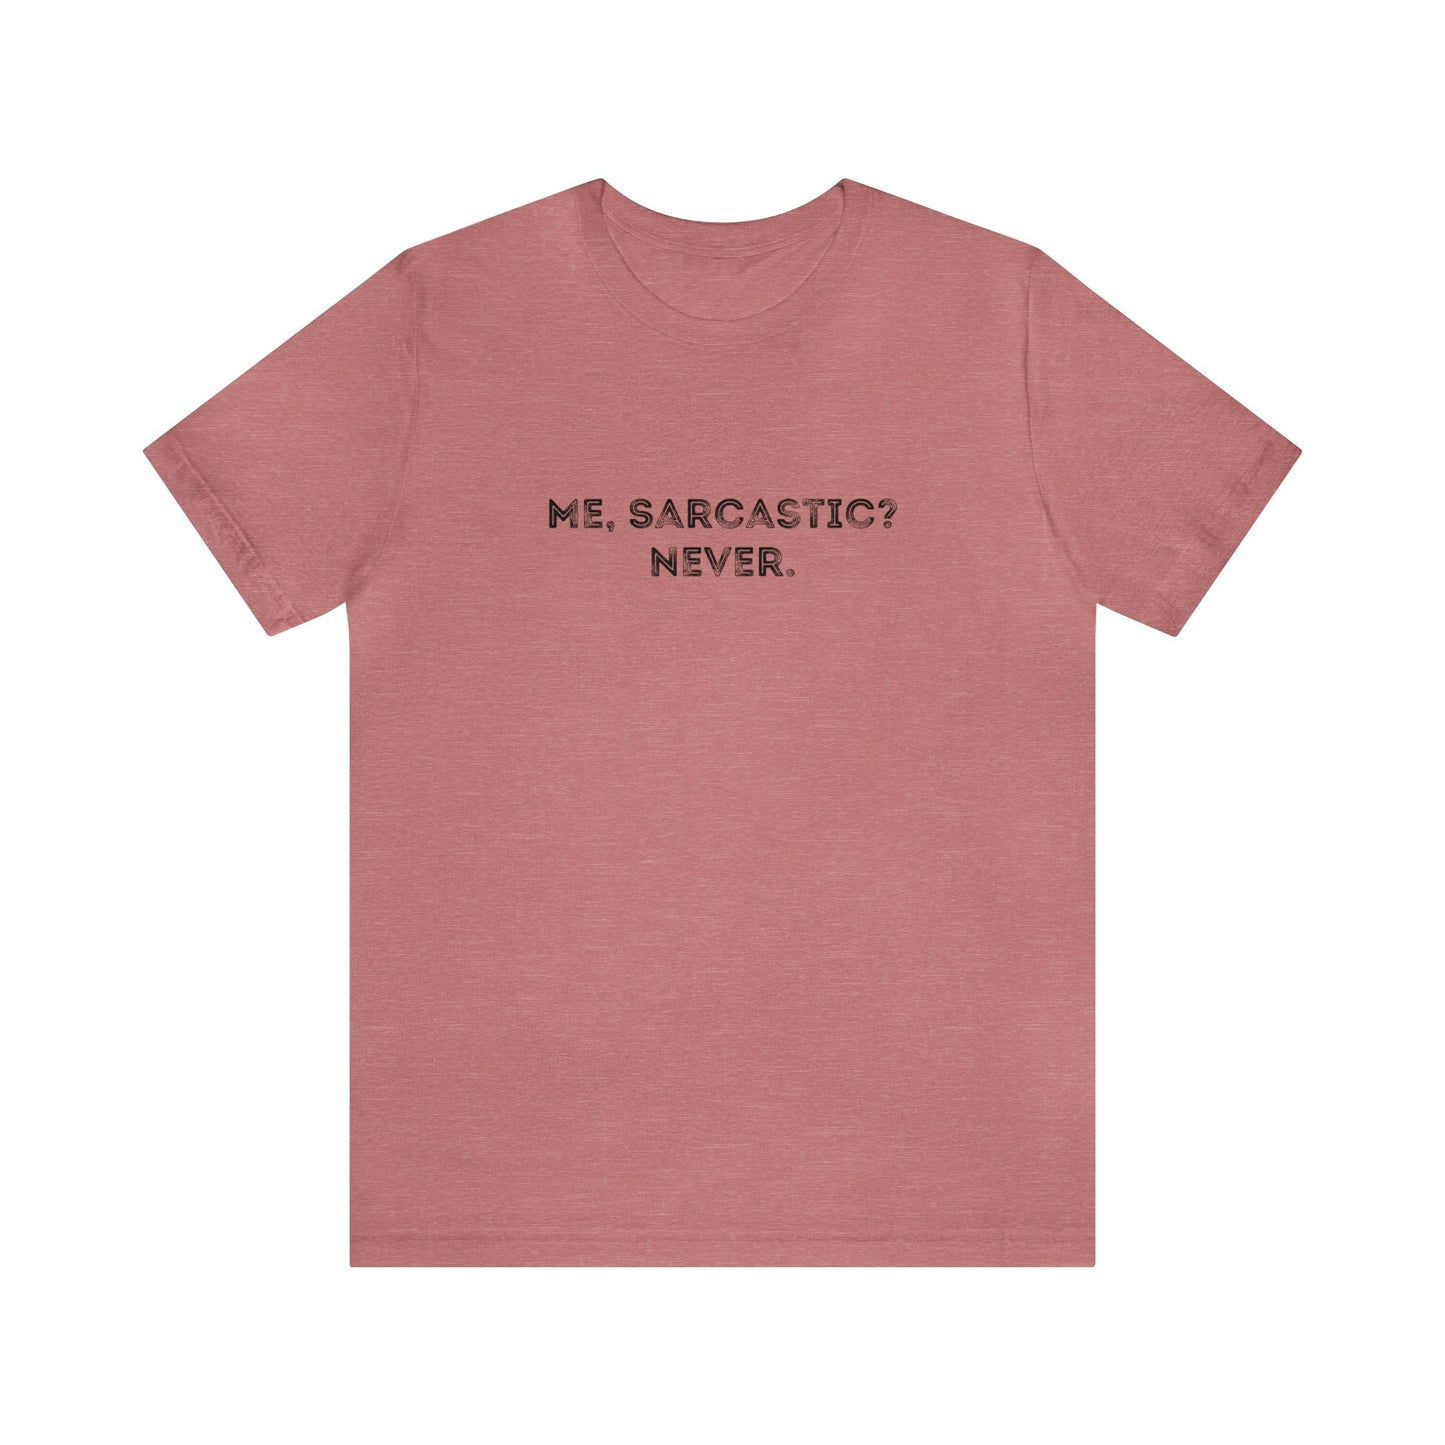 Sarcastic quote t-shirt // Fun and trendy tee for sarcastic friend